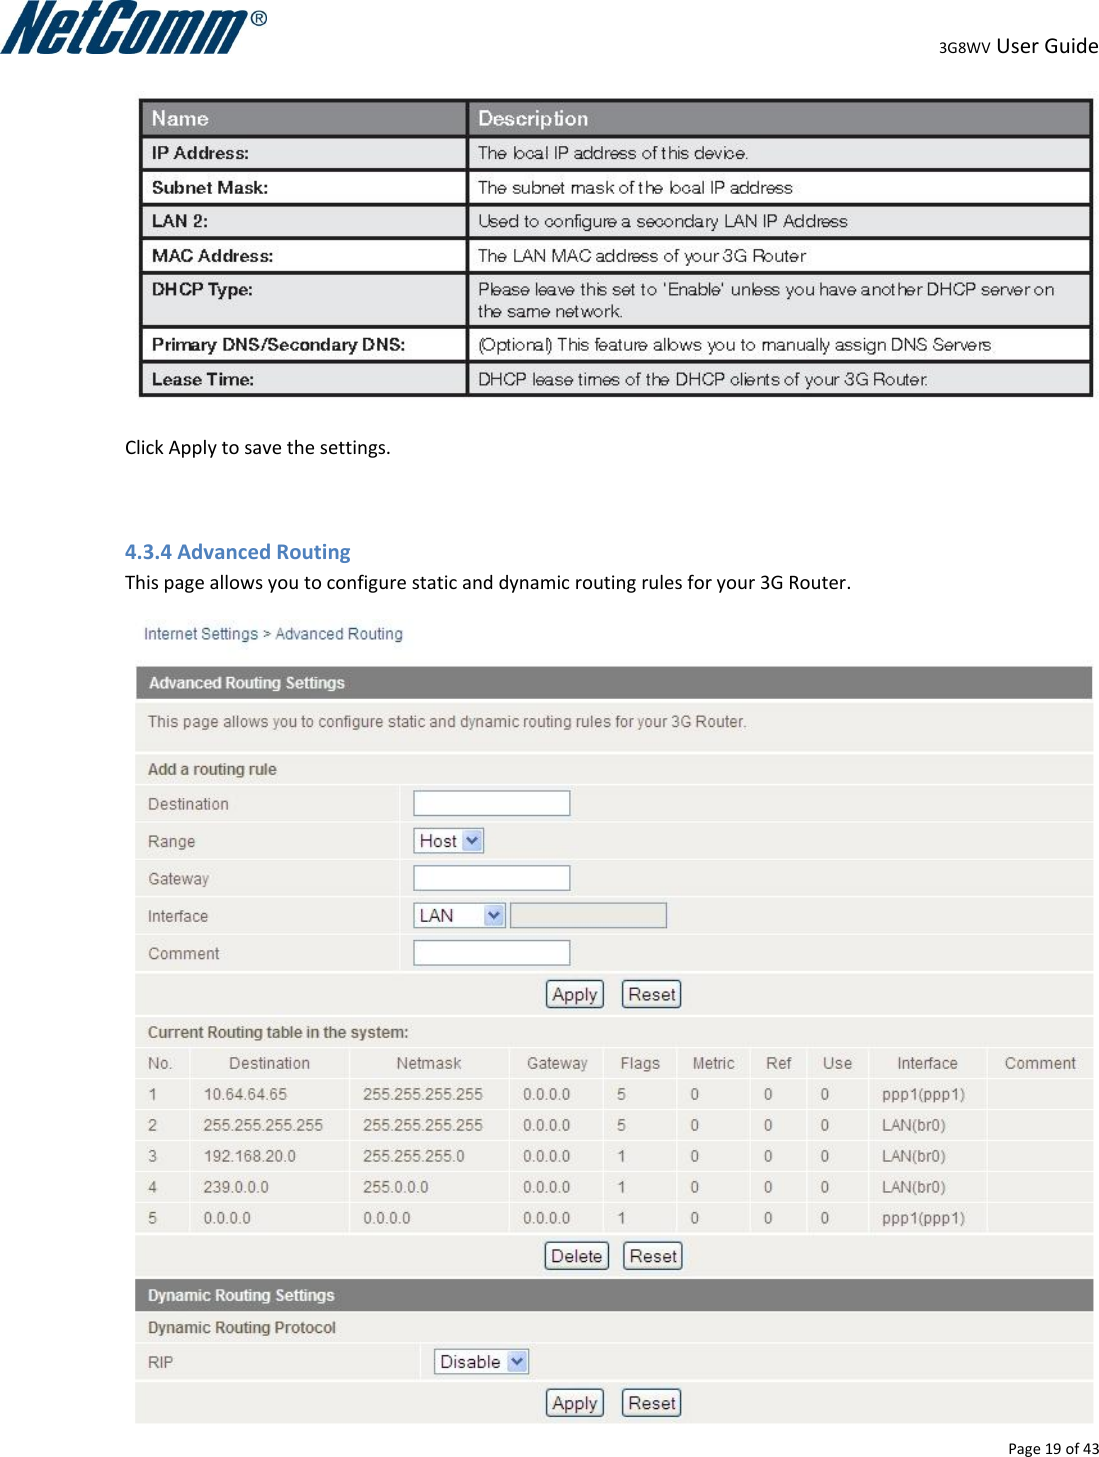                                                                                                                                                                                                                                                                                                                                                                                                3G8WV User Guide   Page 19 of 43   Click Apply to save the settings.  4.3.4 Advanced Routing This page allows you to configure static and dynamic routing rules for your 3G Router.  